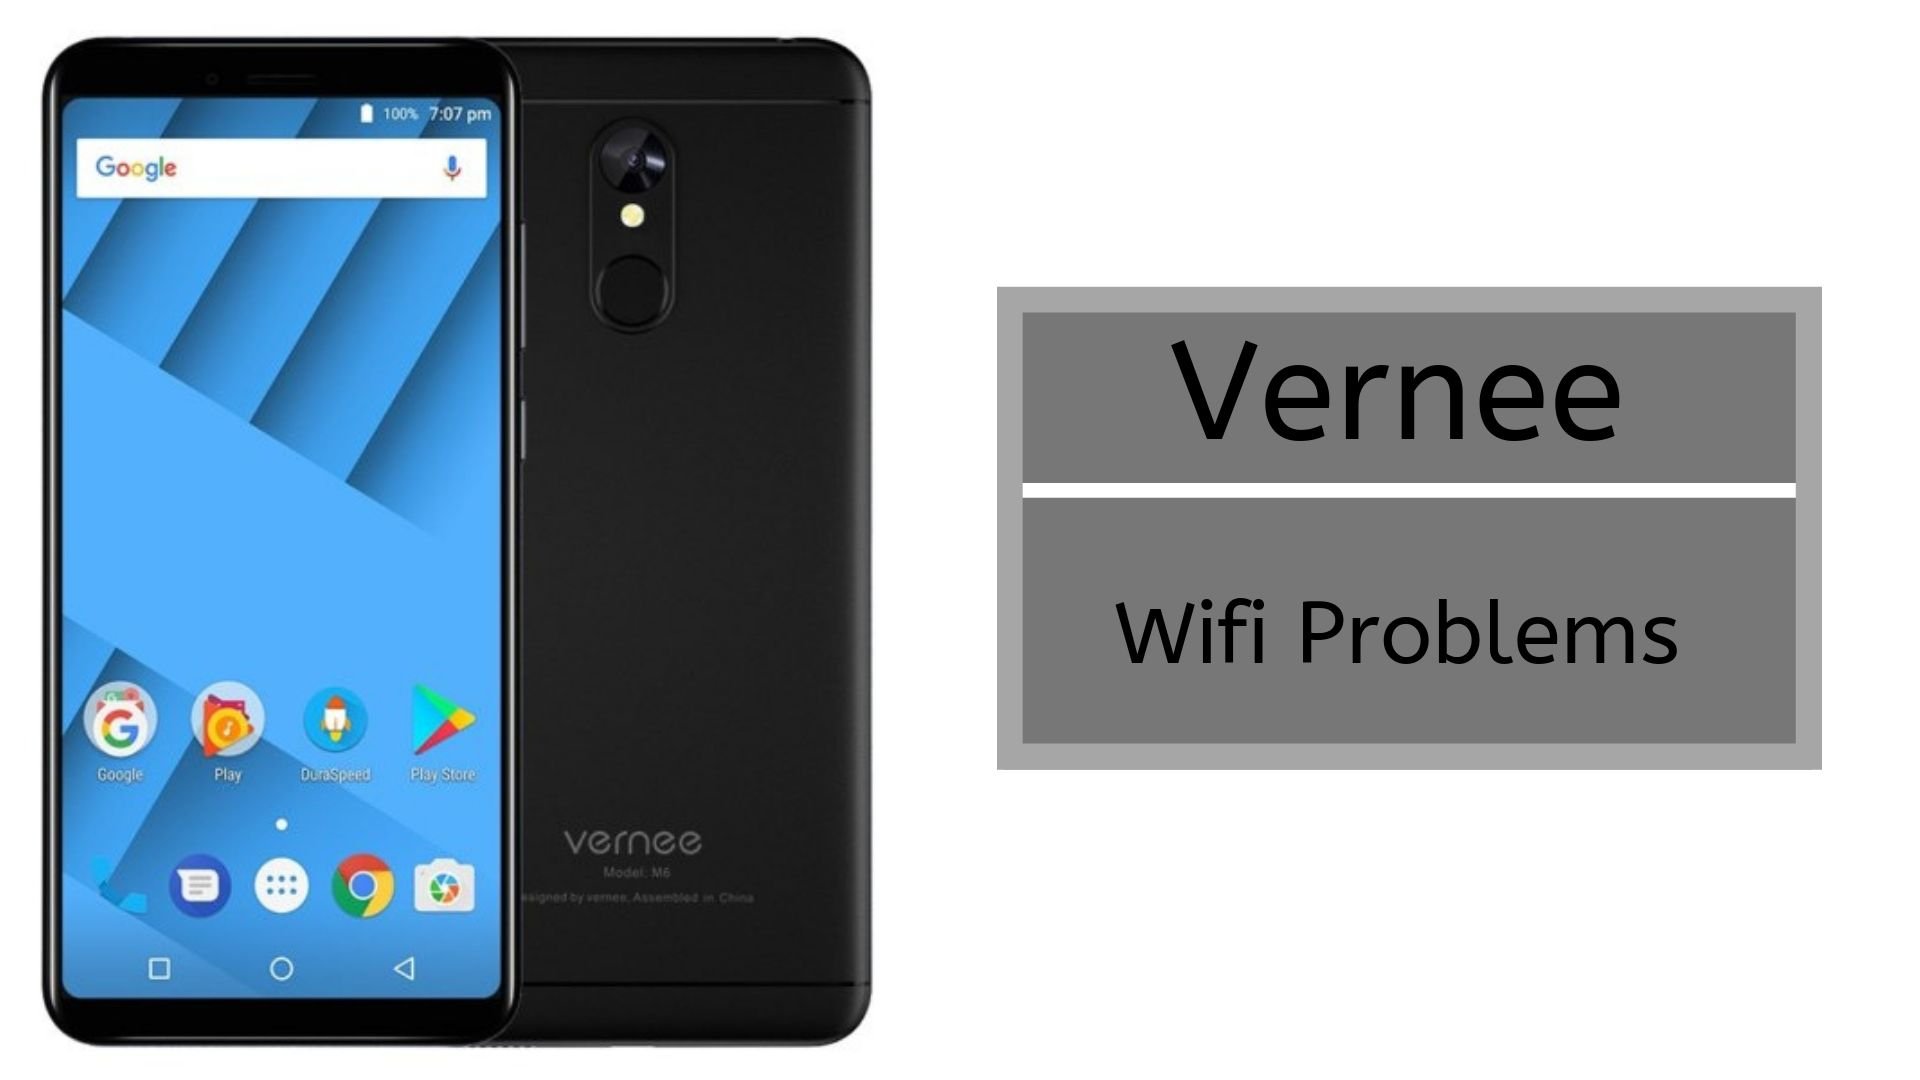 Quick Guide To Fix Vernee Wifi Problems [Troubleshoot]